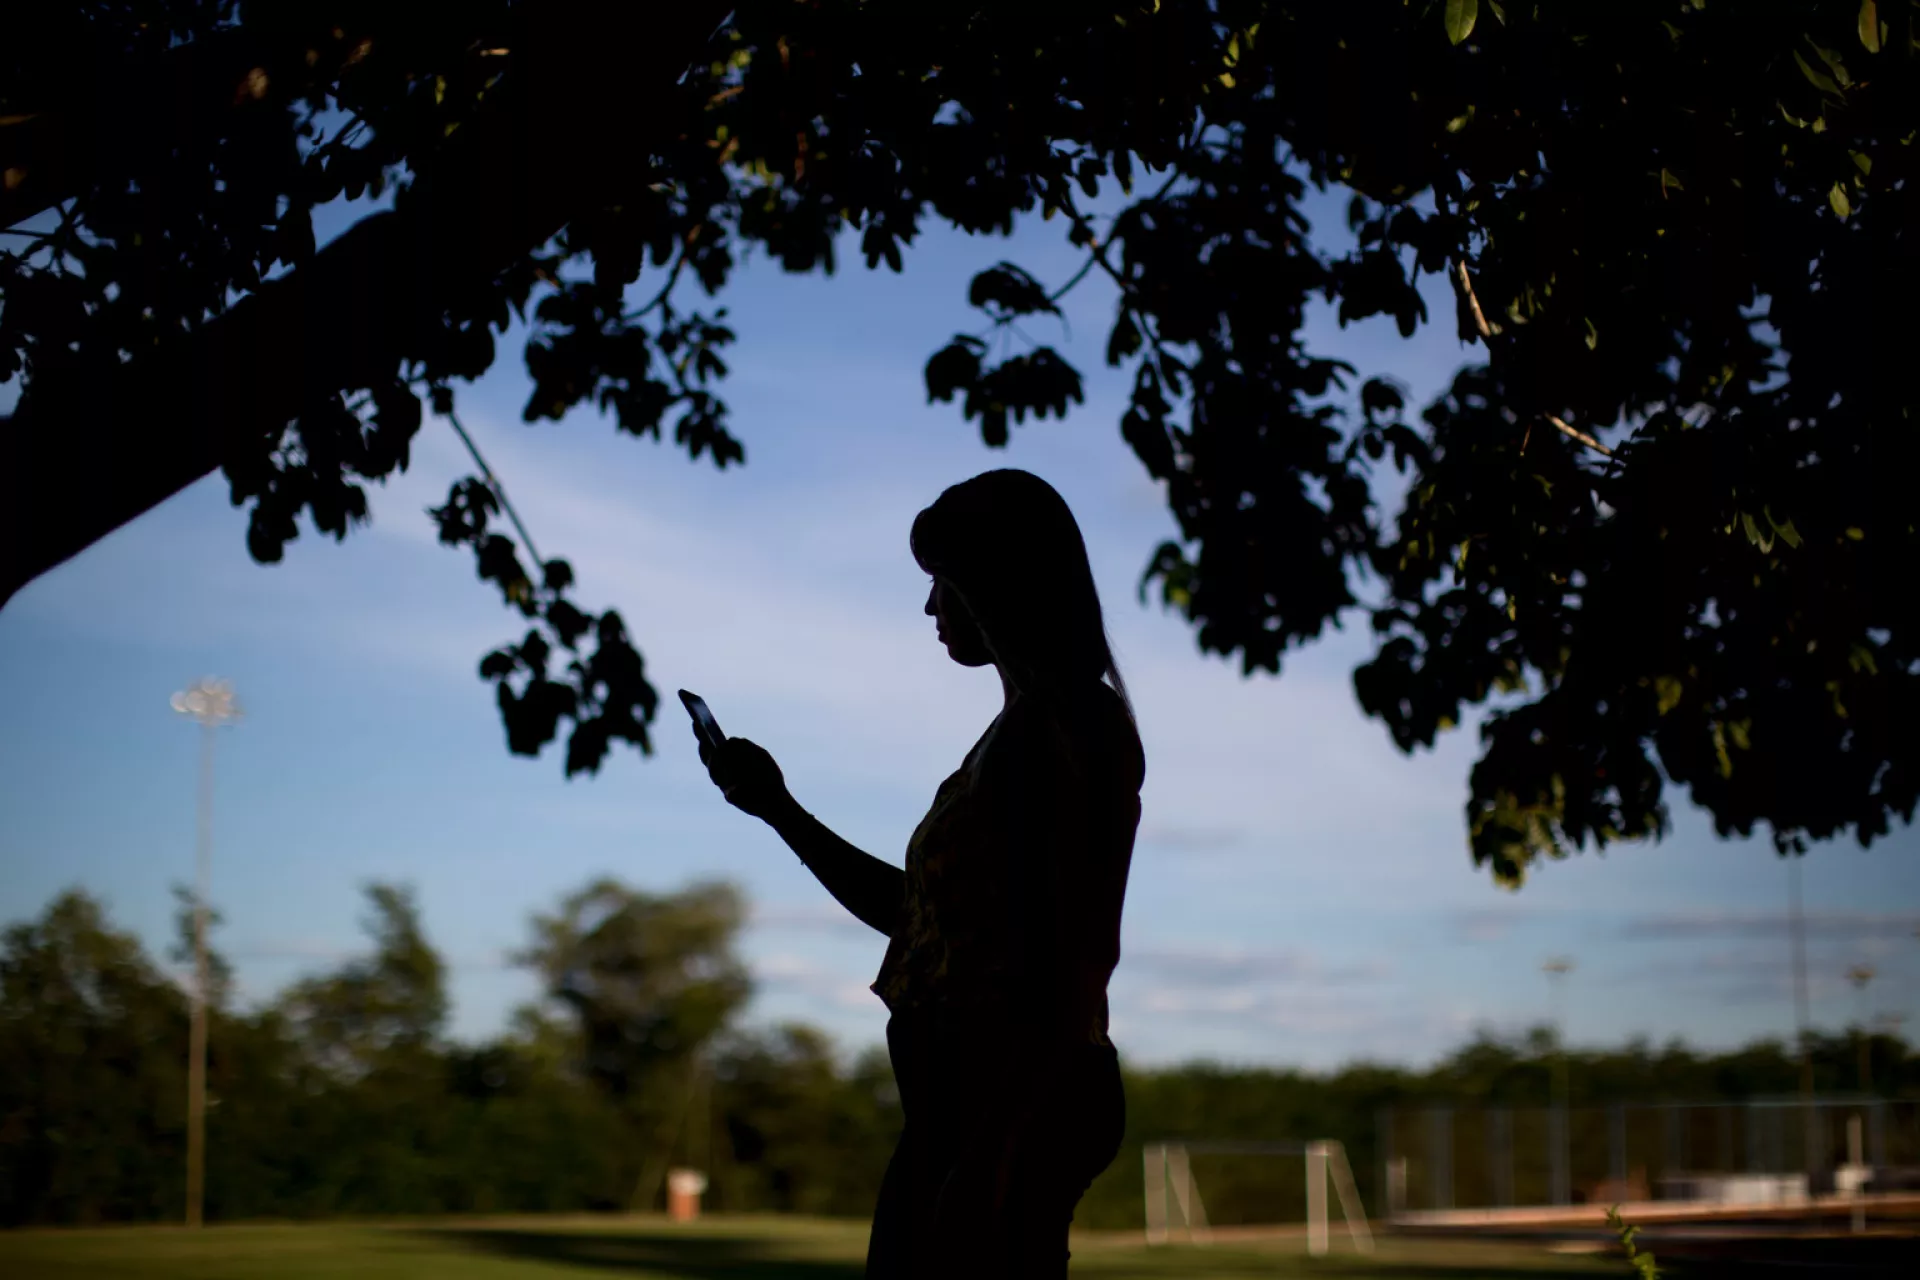 essica Marques, 20, checks her mobile phone underneath a tree in a park in Taiobeiras municipality in the Southeastern state of Minas Gerais, Brazil.